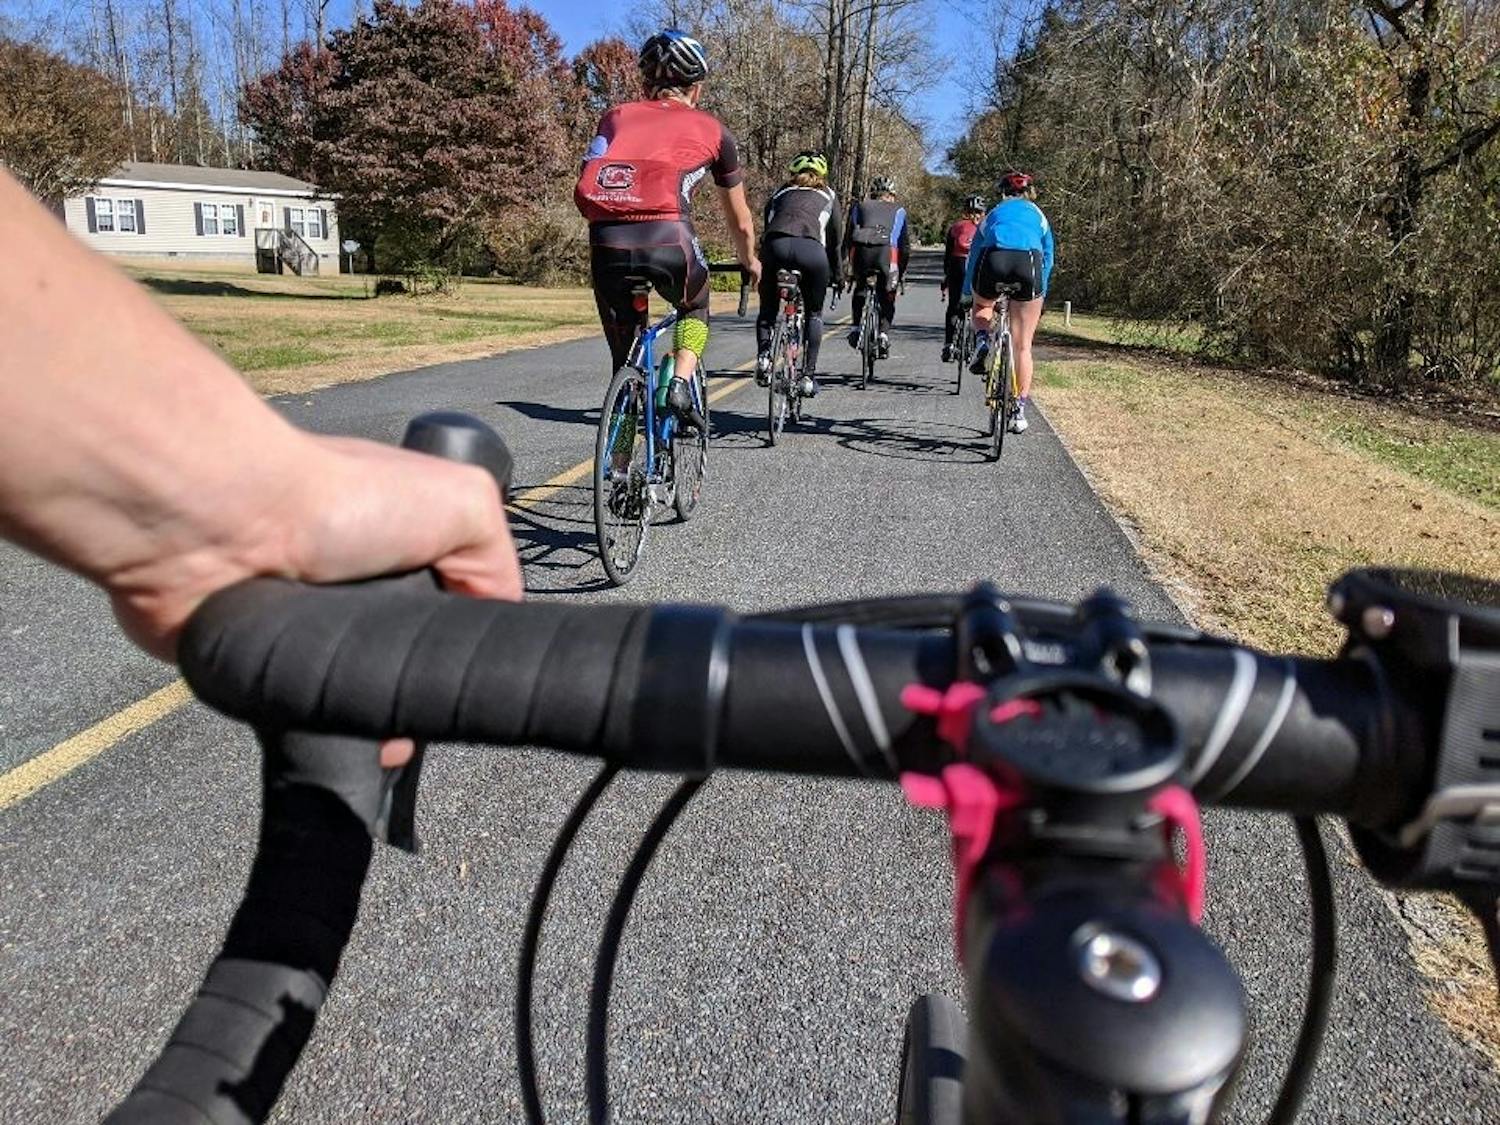 Bicyclists participate in a group ride. USC’s Gamecock and Cycling Triathlon Club’s purpose is to promote the sport of cycling and triathlon within the university and the community of South Carolina.